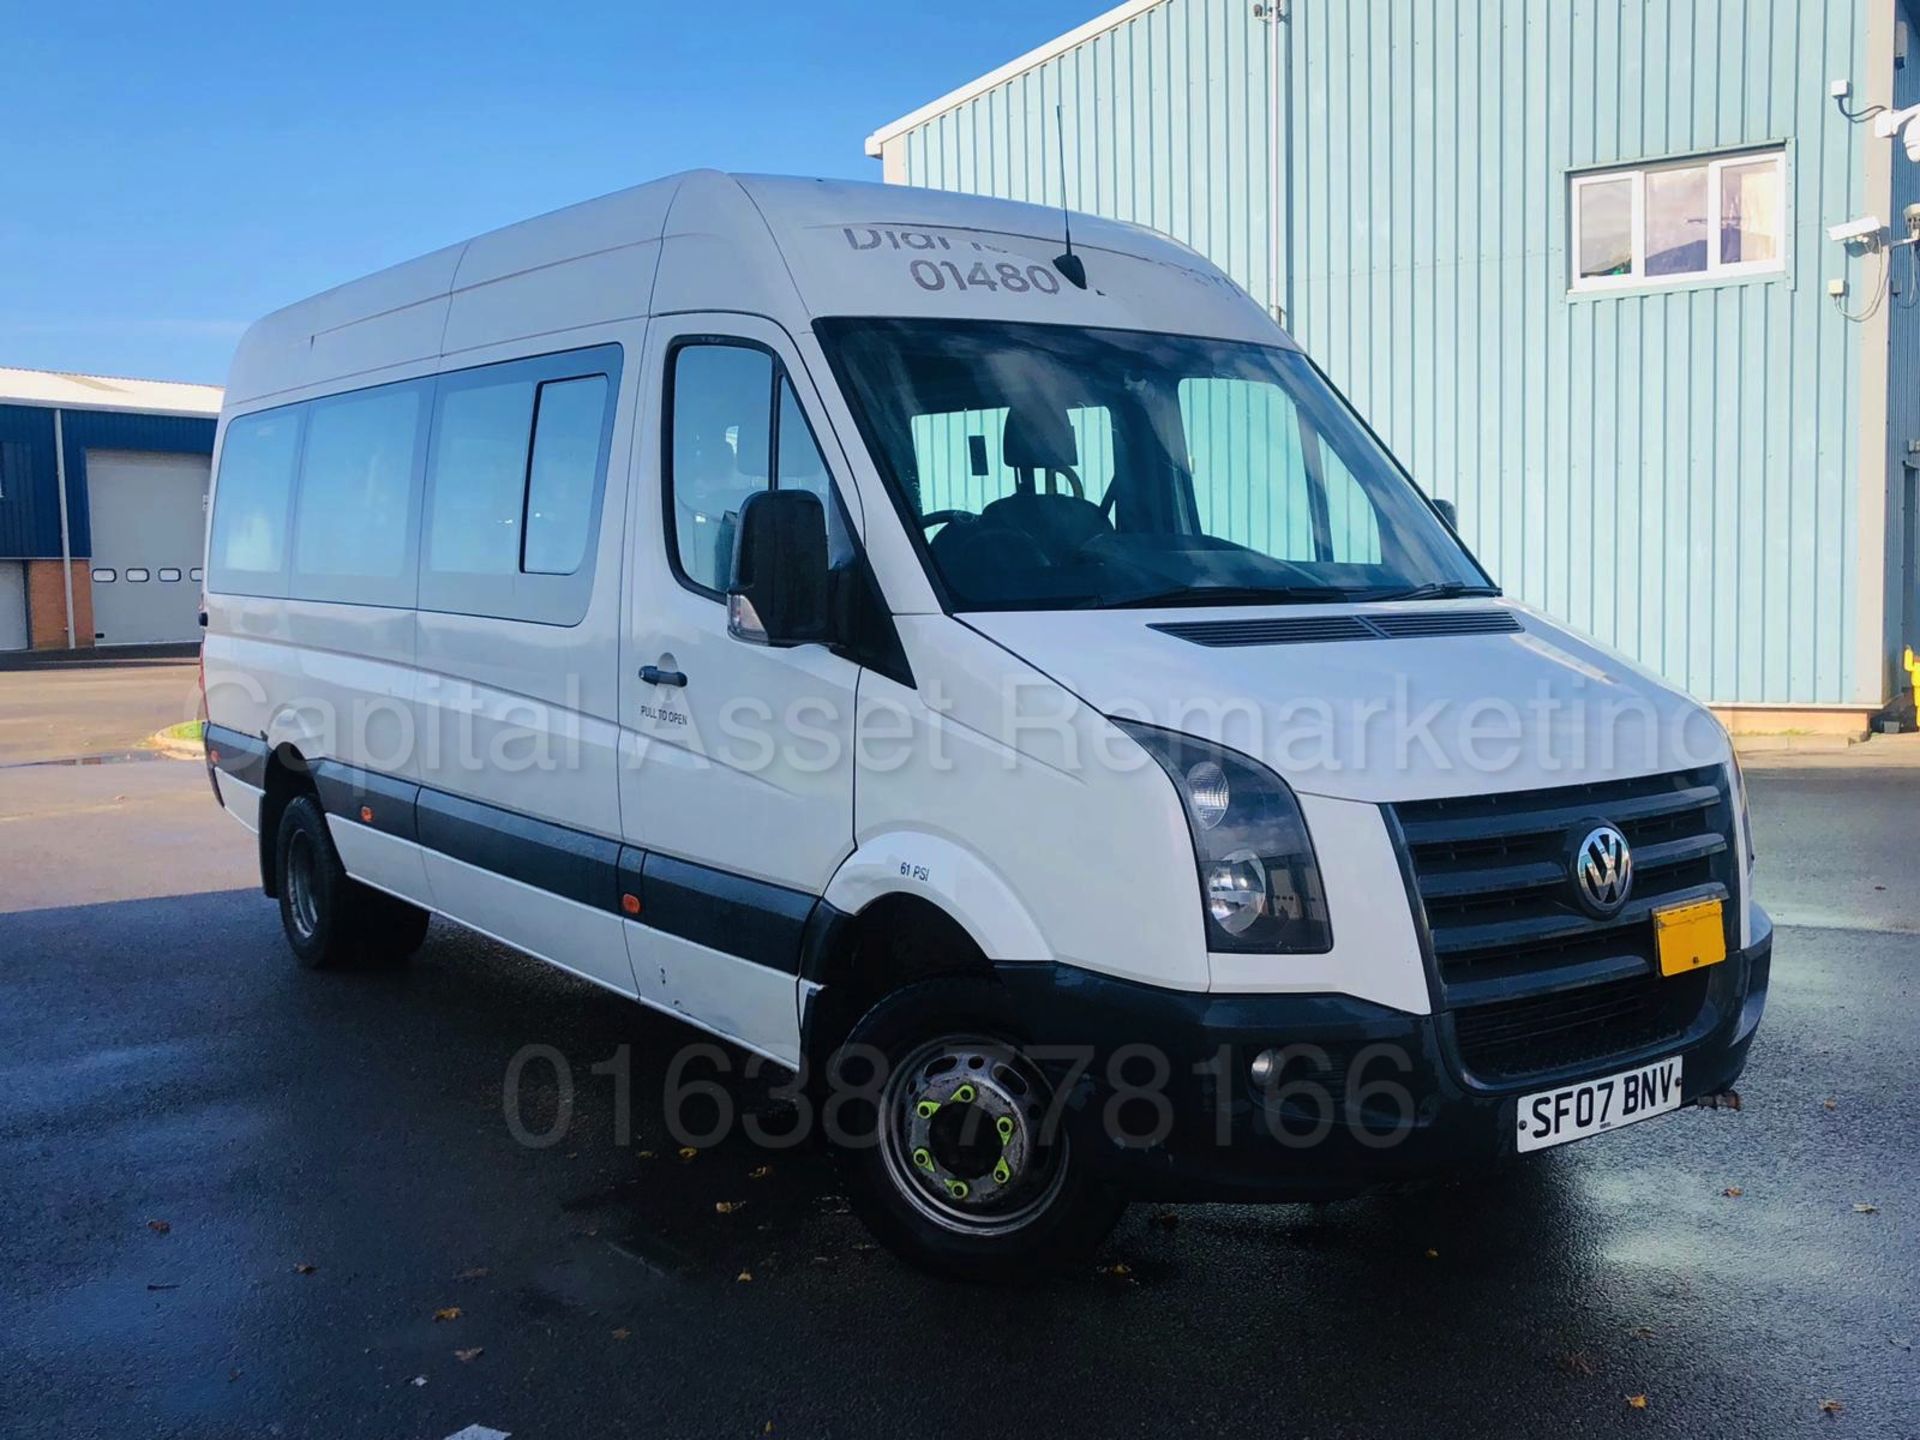 VOLKSWAGEN CRAFTER 2.5 TDI *LWB - 16 SEATER MINI-BUS / COACH* (2007) *ELECTRIC WHEEL CHAIR LIFT* - Image 4 of 38